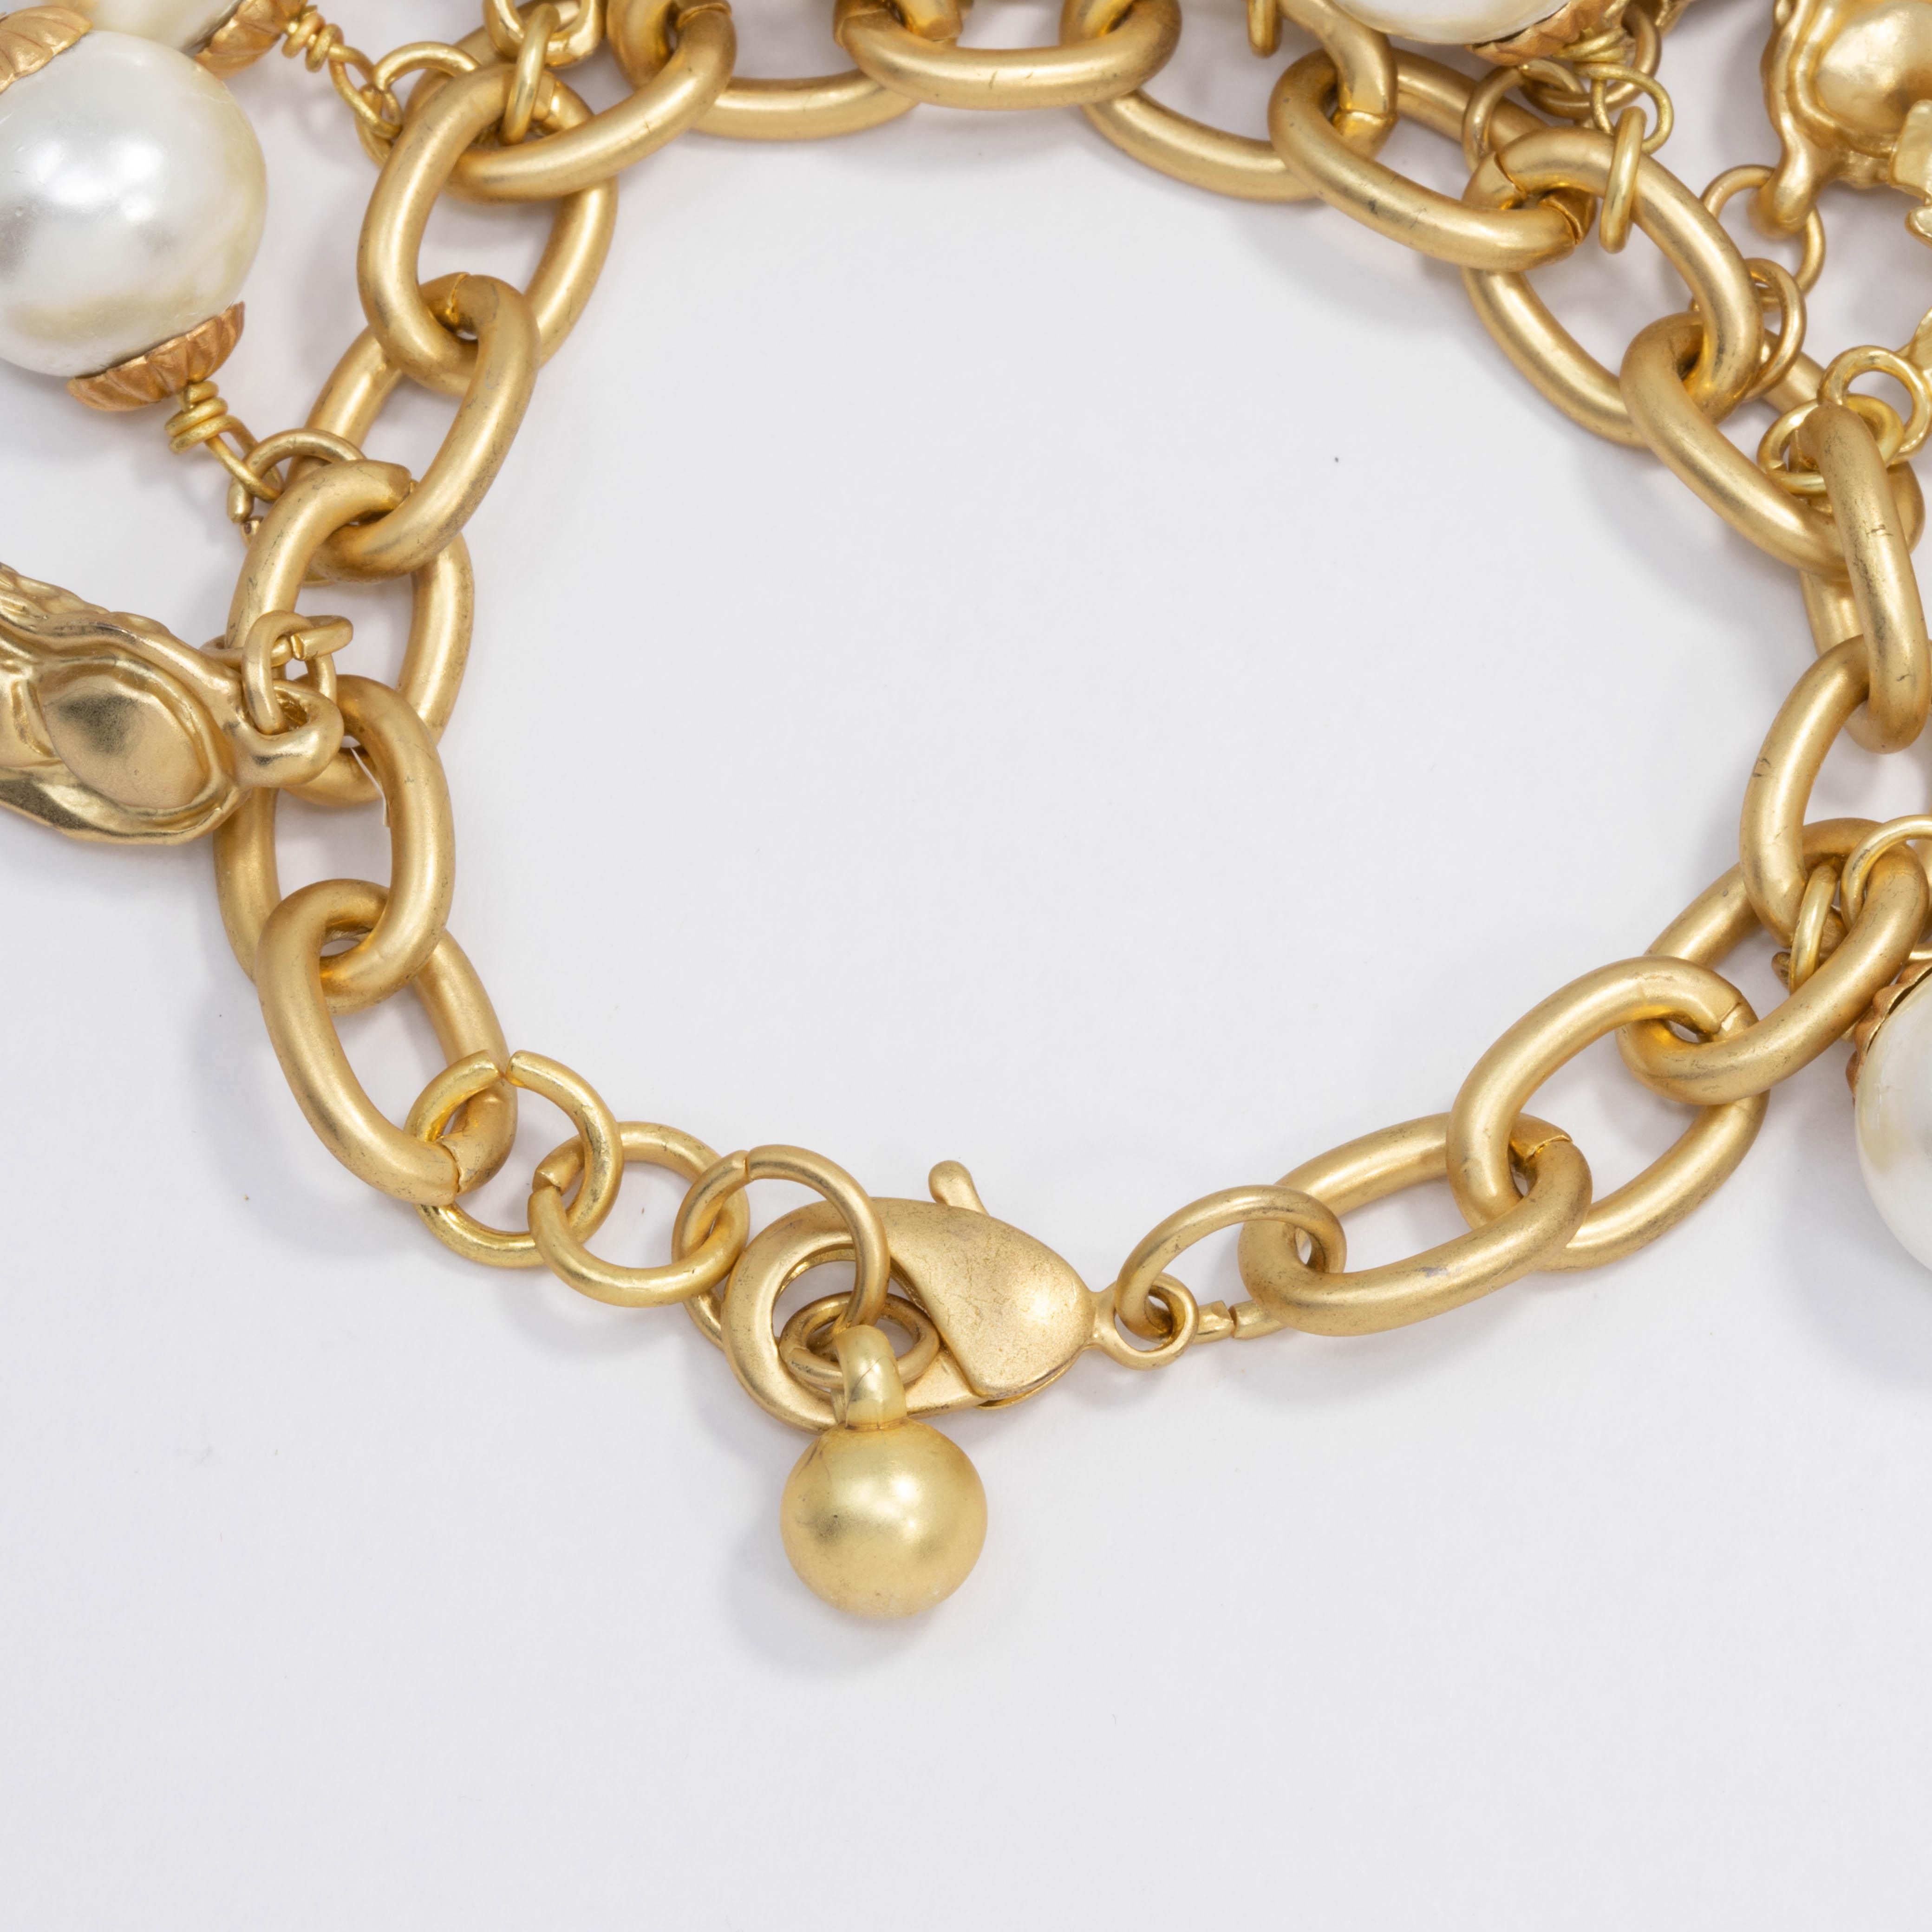 Women's or Men's Peanut, Flower, and Faux Pearl Charm Chain Bracelet in Gold, Mid to Late 1900s